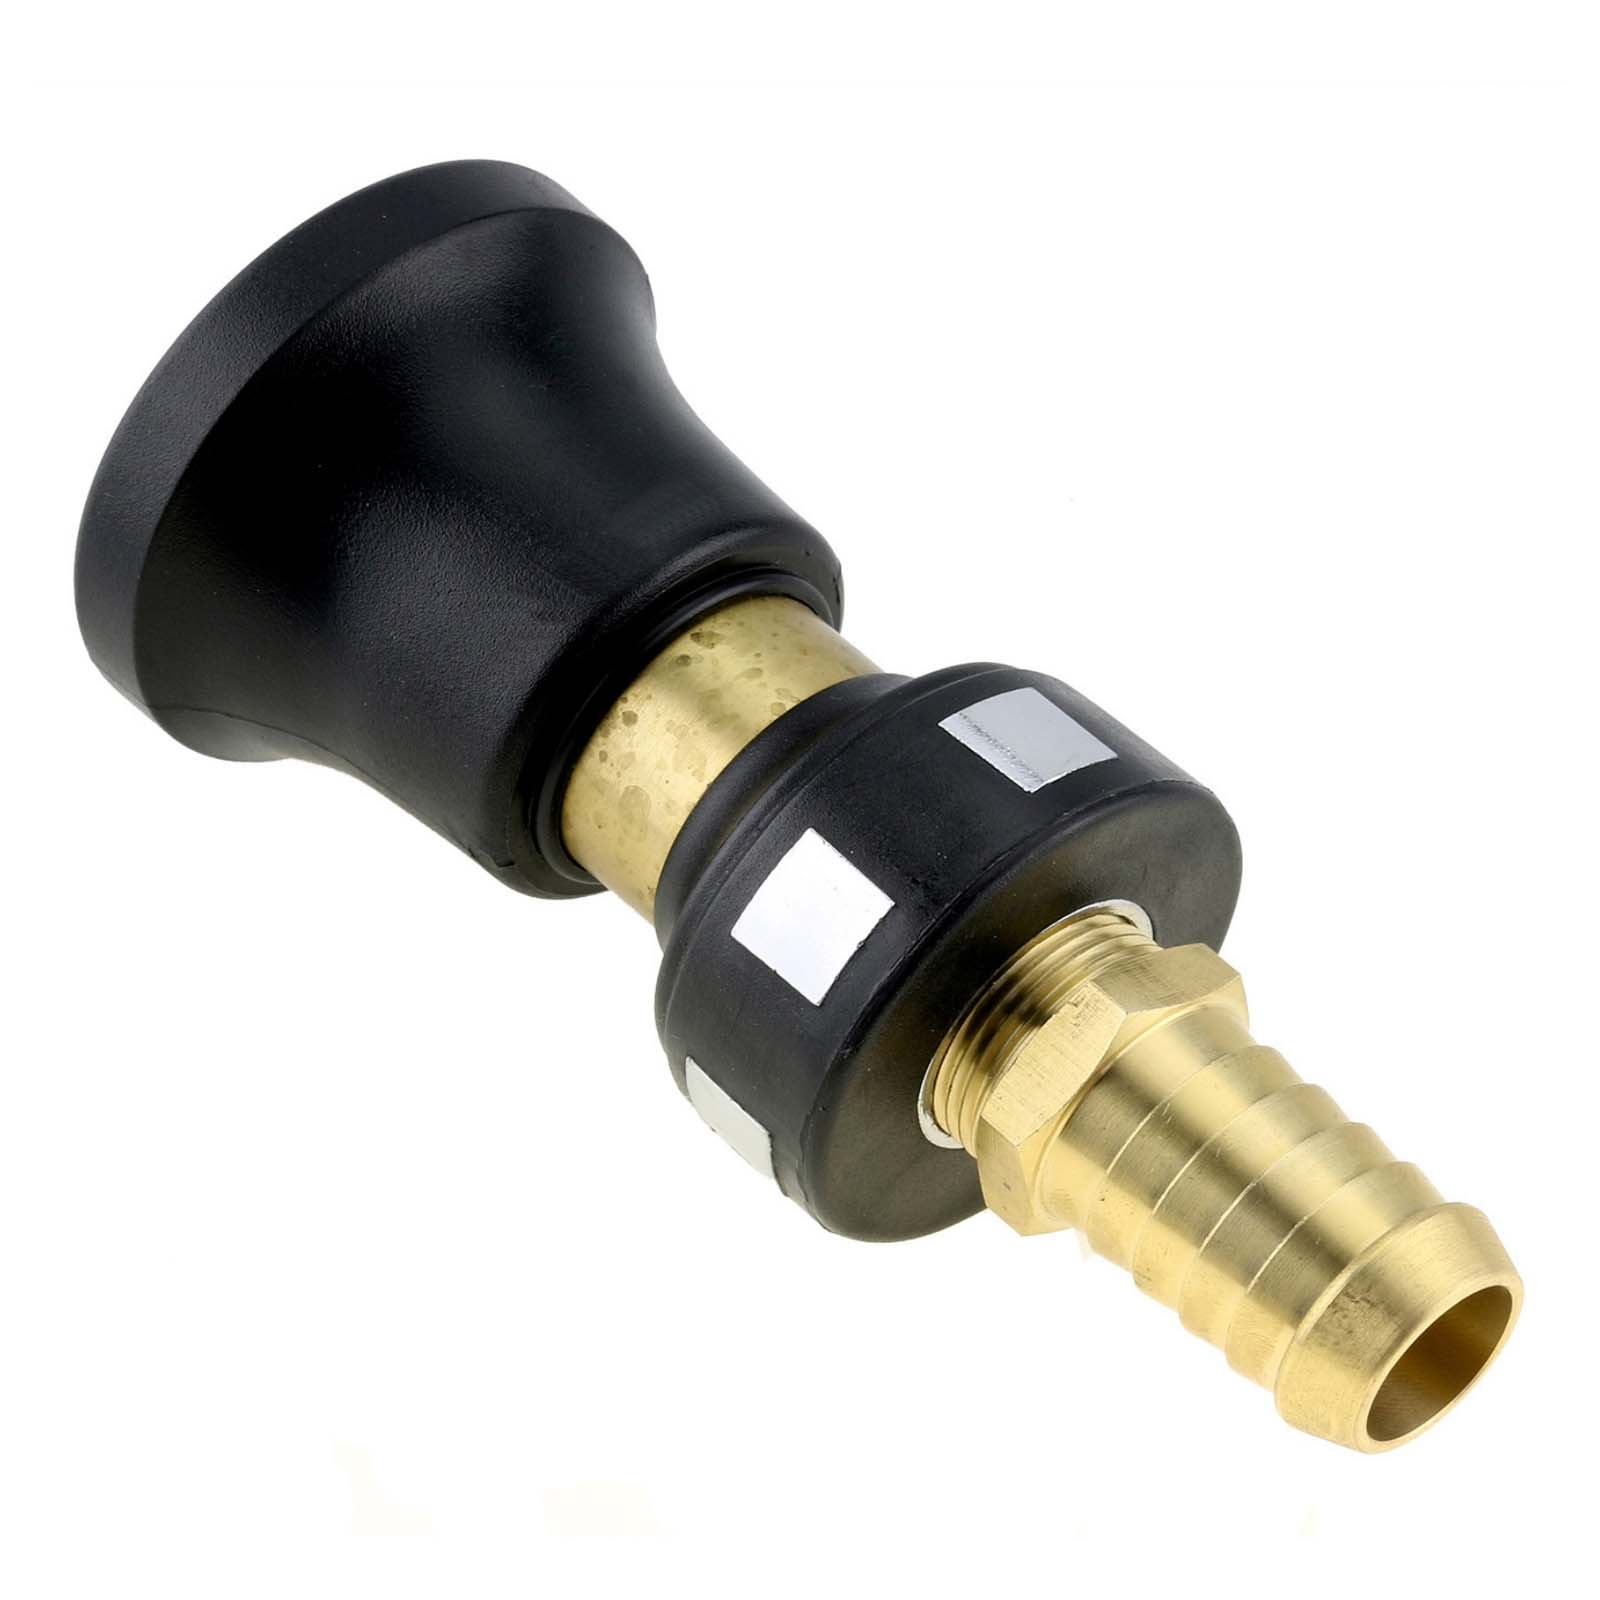 Adjustable Nozzle for Fire Fighting With Fitting To Adapt To 1inch Hose Water Pump